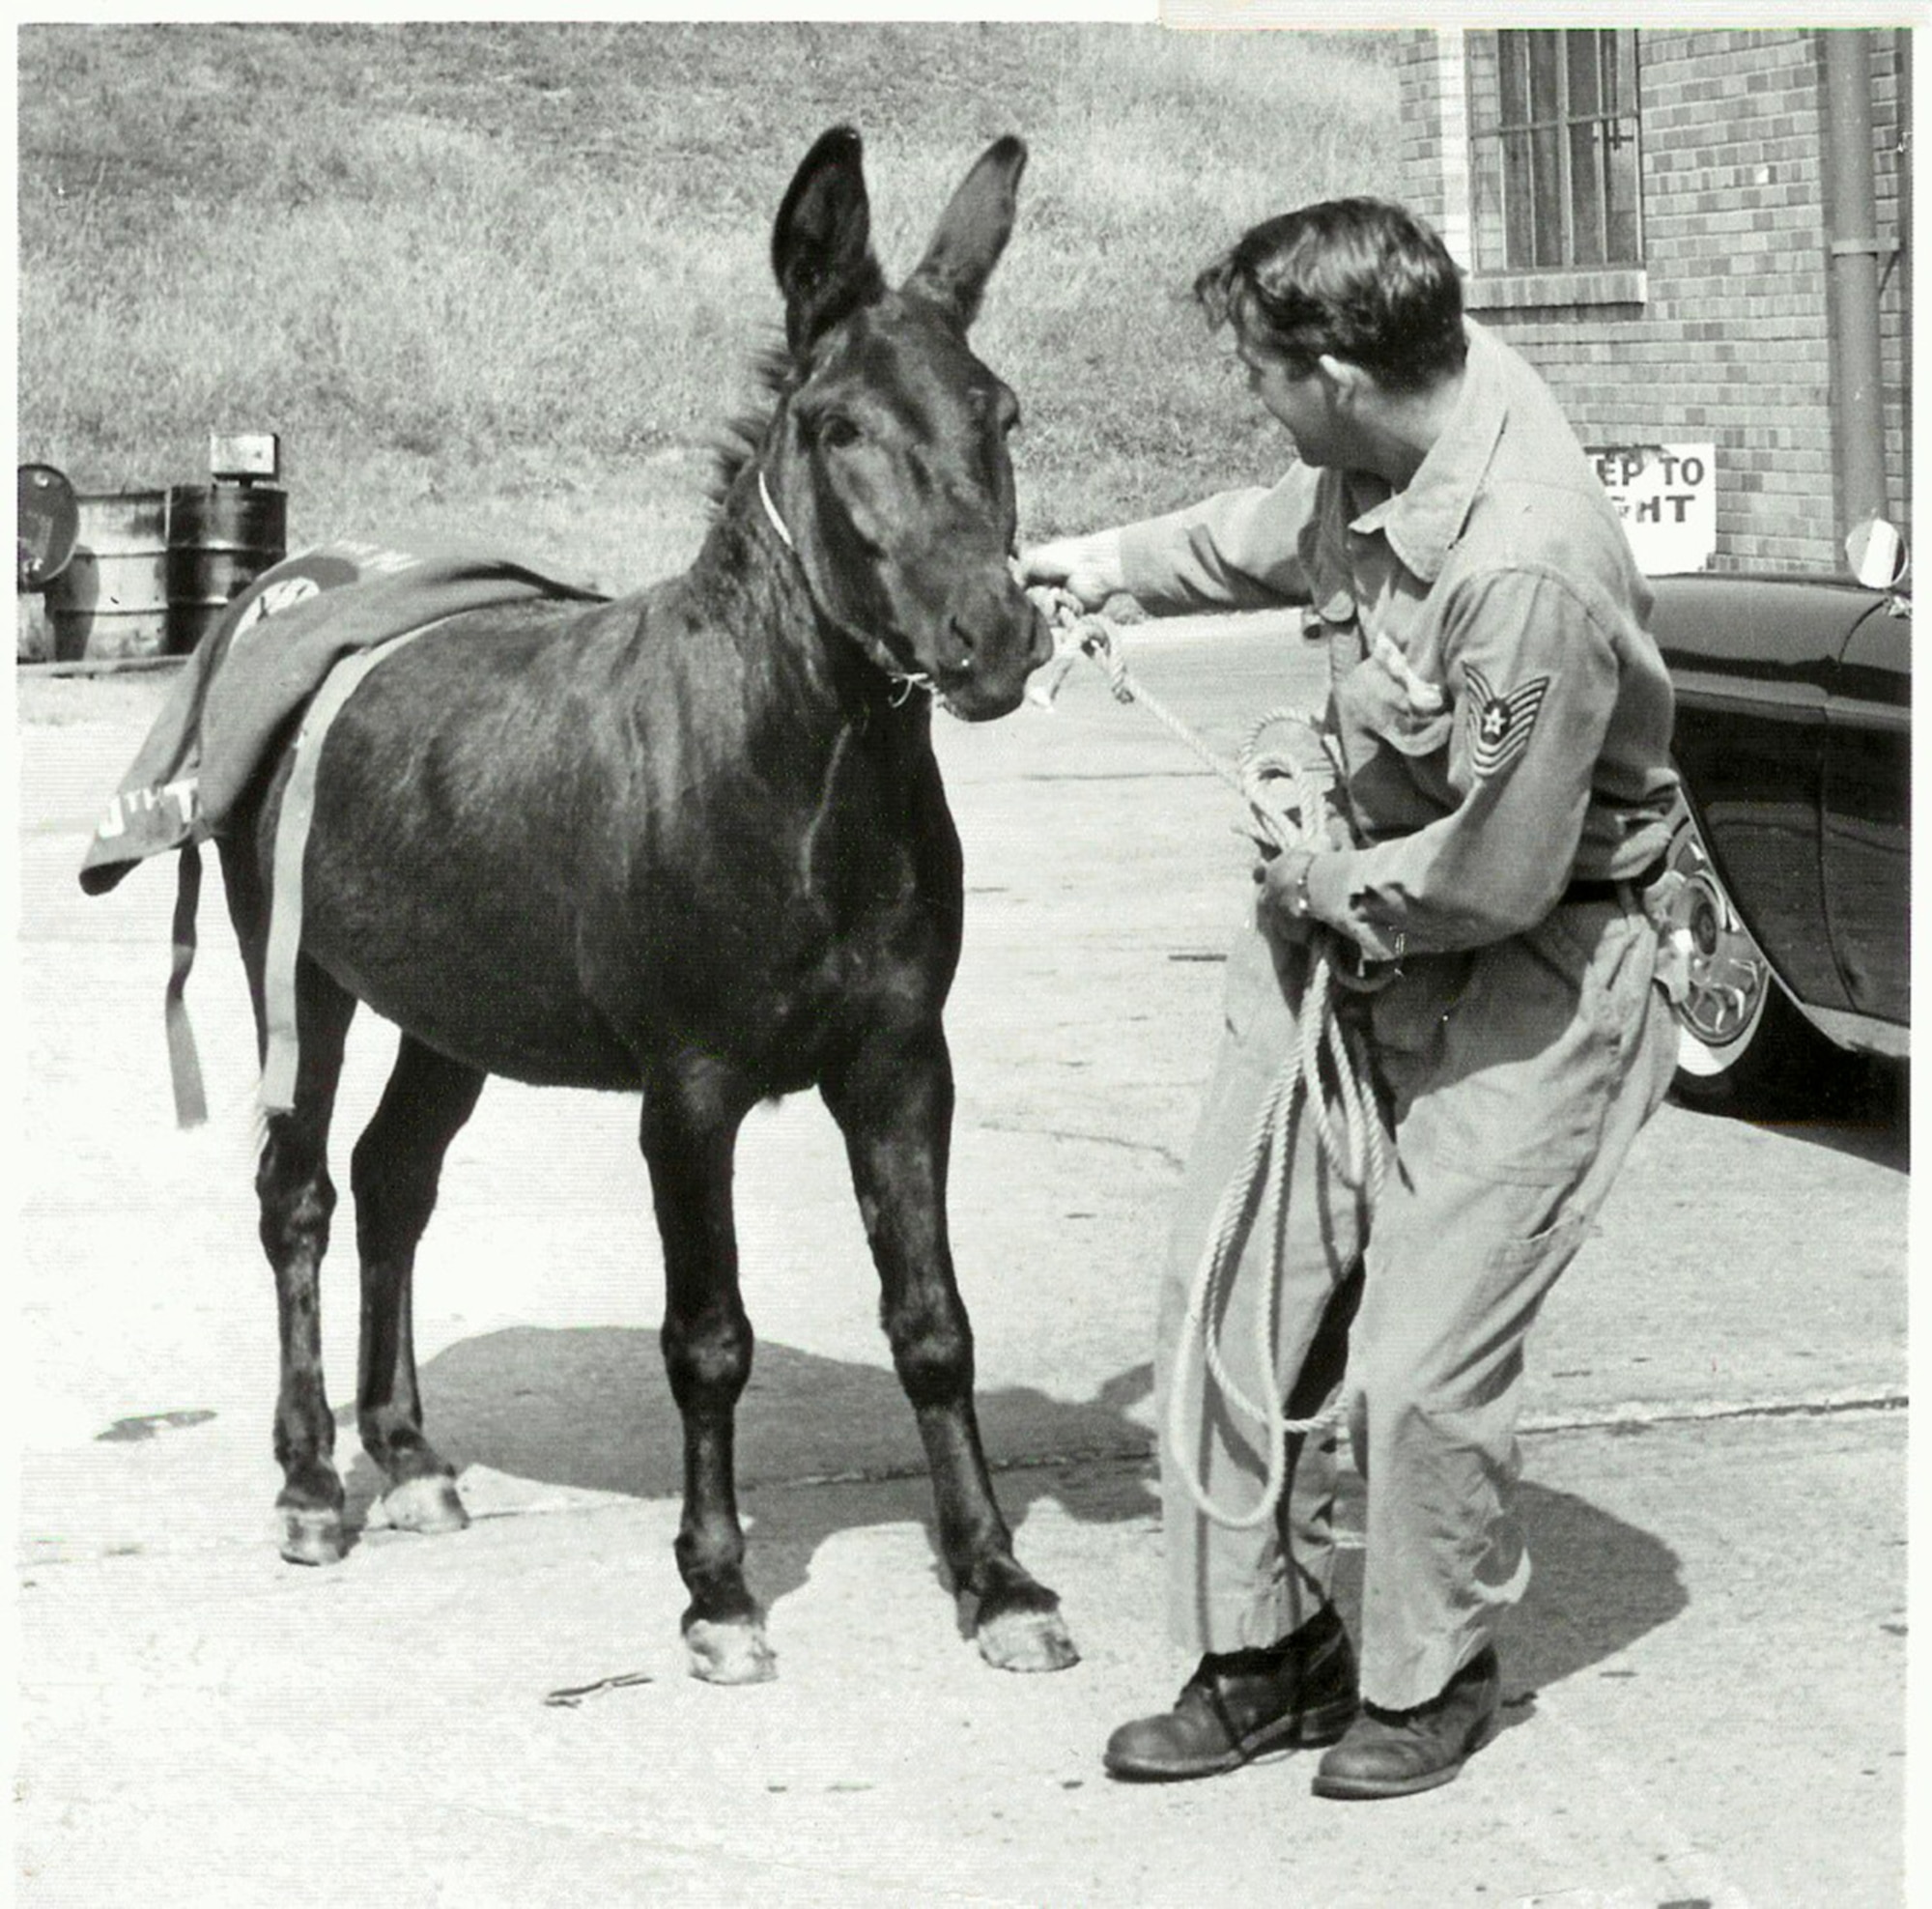 Airman 1st Class Banjo A. Burro, the beloved mascot of the 131st for many years could often be as stubborn as a…well, you know.  Banjo, actually a Missouri Mule, joined the wing in the late 1950’s and appeared at many wing events and parades.  Nominated for the First Sgt. position at one time, but recommended by Director of Personnel  to "Second Sgt." position since First Sgt. position was presently filled. The Missouri Mule has long been identified with the 110th and 131st as the mascot of the unit and appears on patches and aircraft, including the "Spirit of Saint Louis."  (131st Bomb Wing file photo/RELEASED)